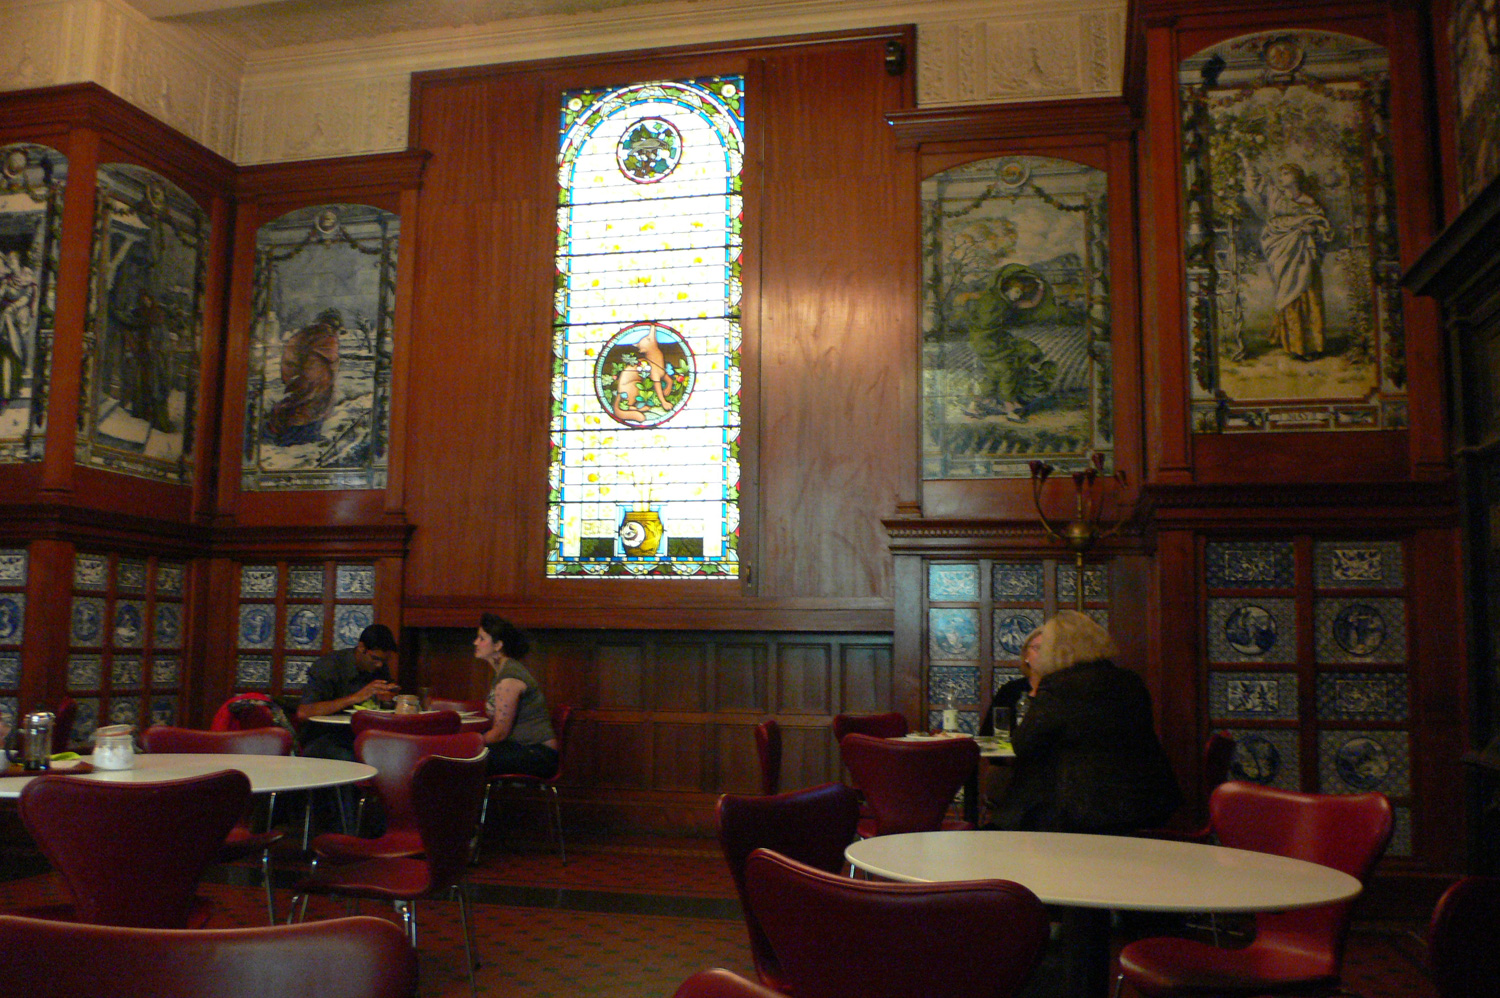 Poynter room cafe at the V & A museum